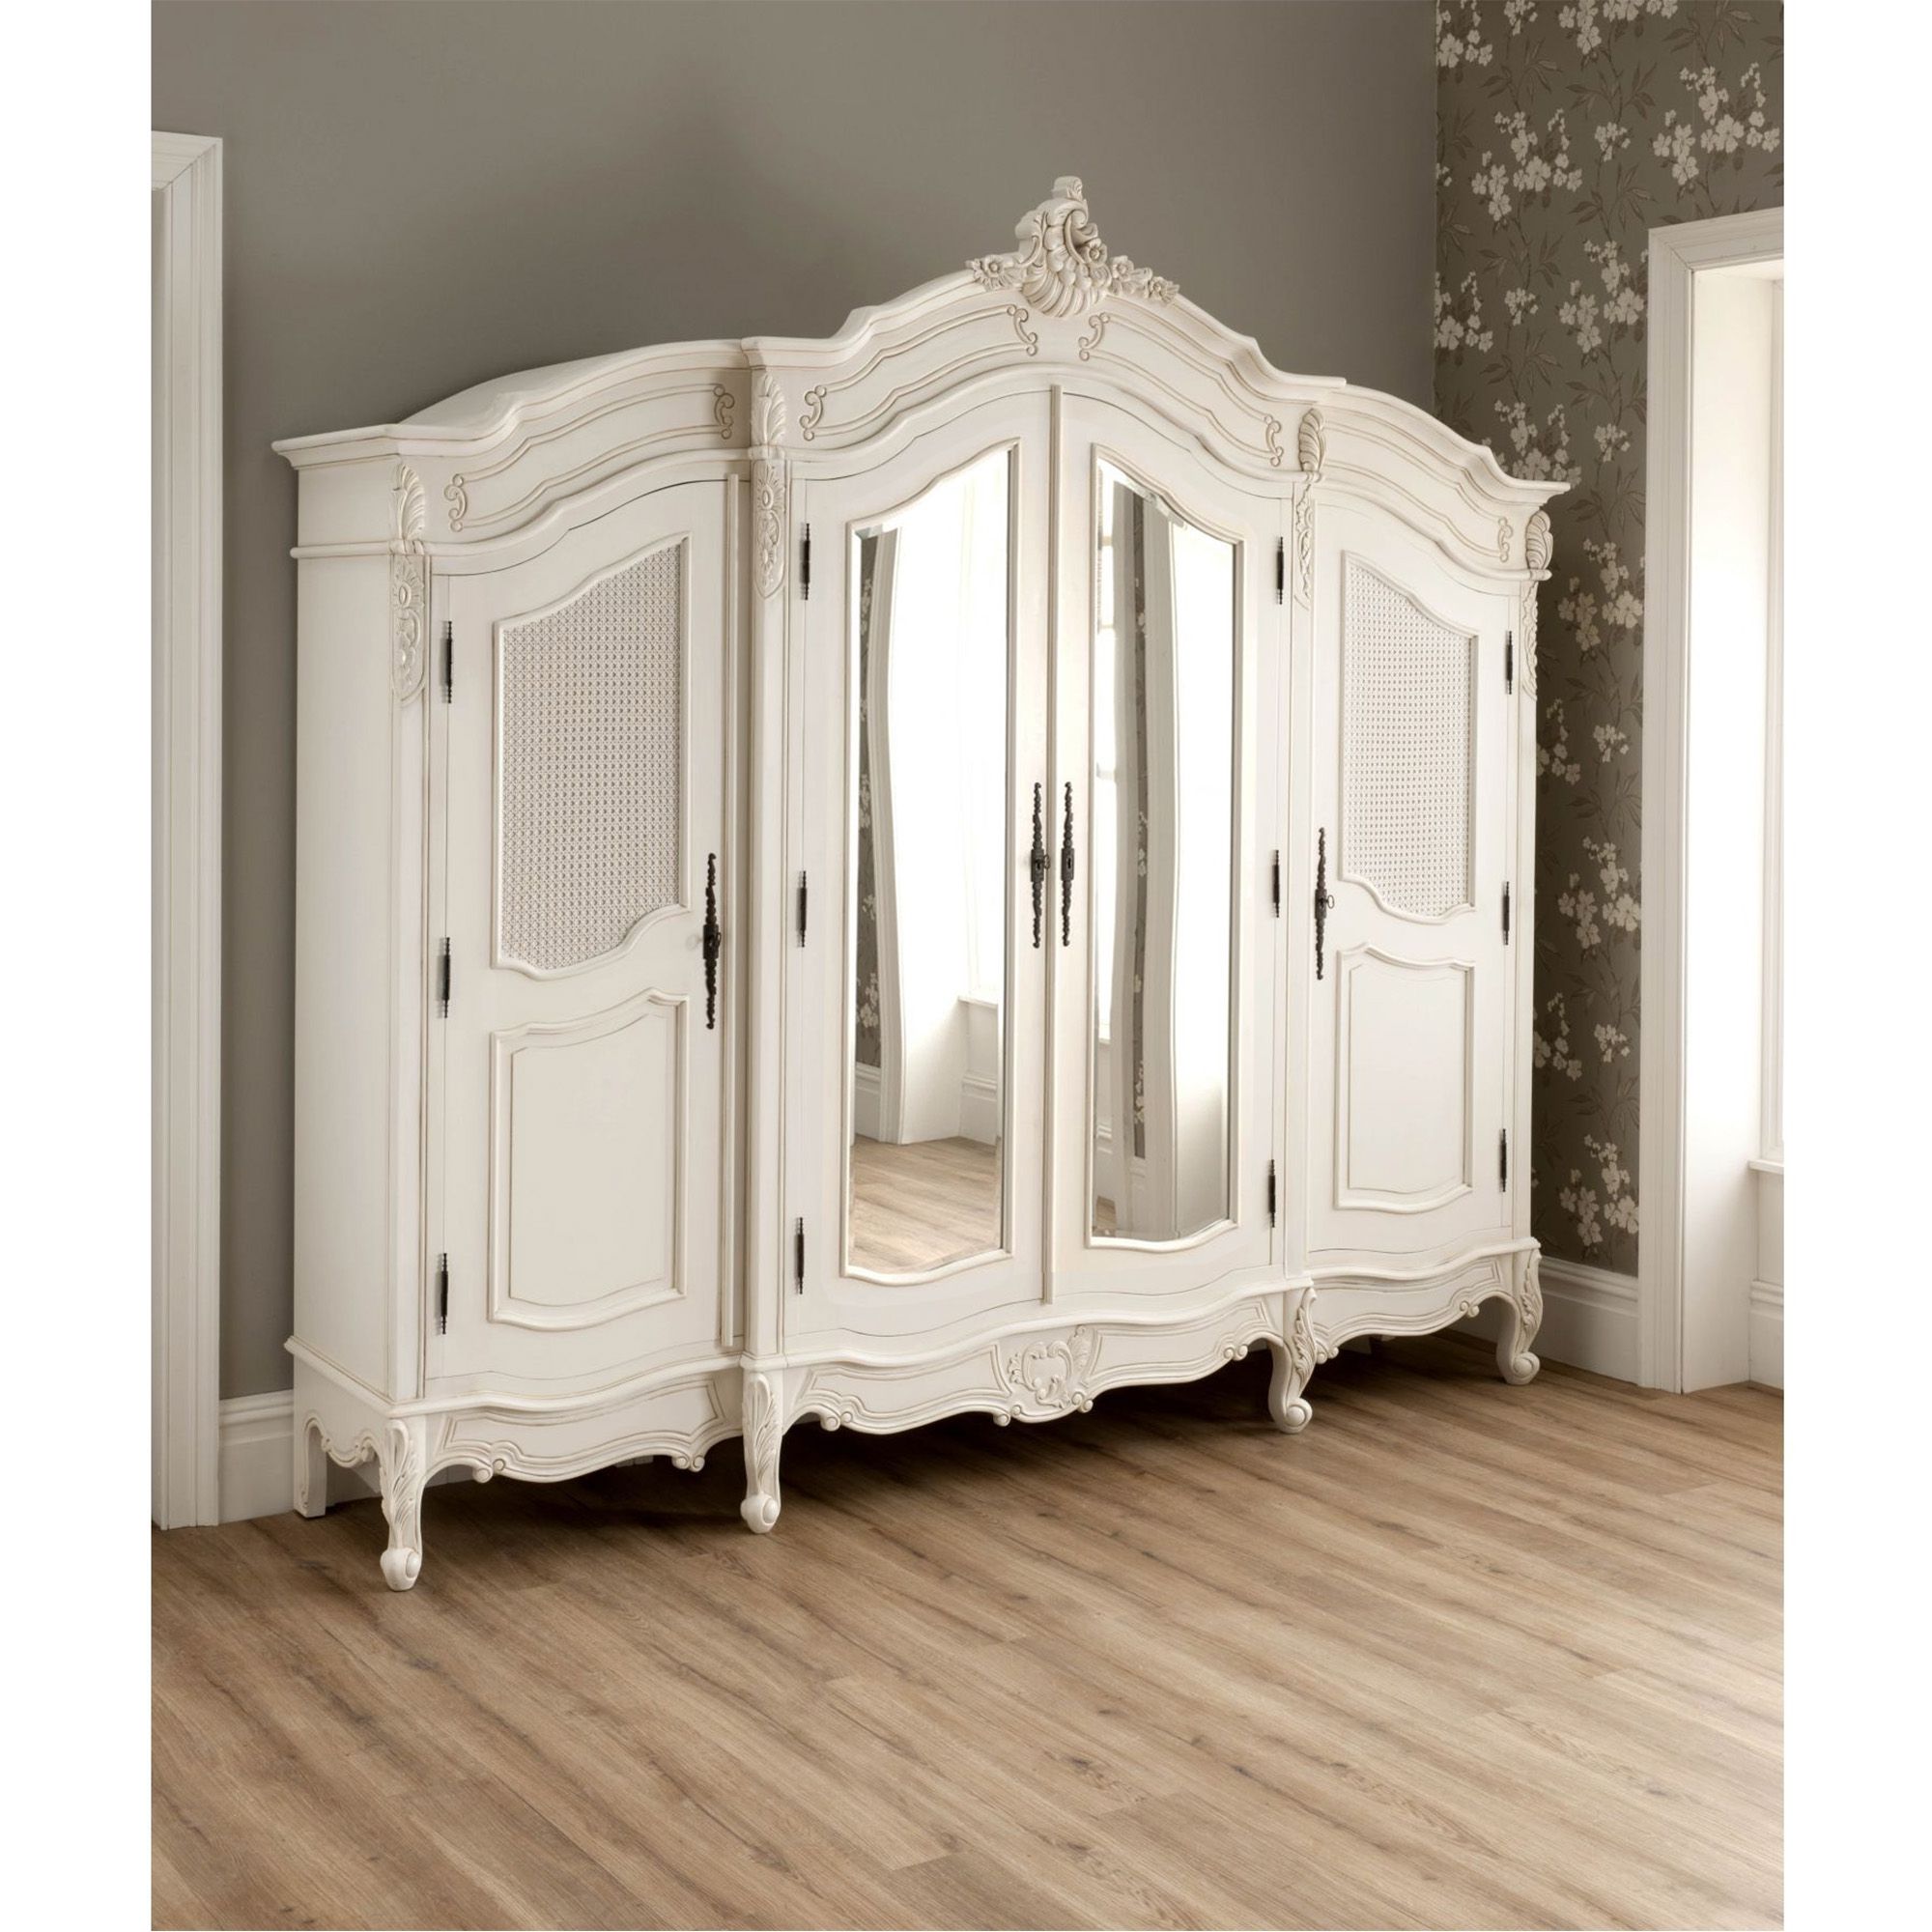 Antique French Wardrobe | Vintage Wardrobes | Antique Wardrobes | With Regard To French White Wardrobes (View 12 of 20)